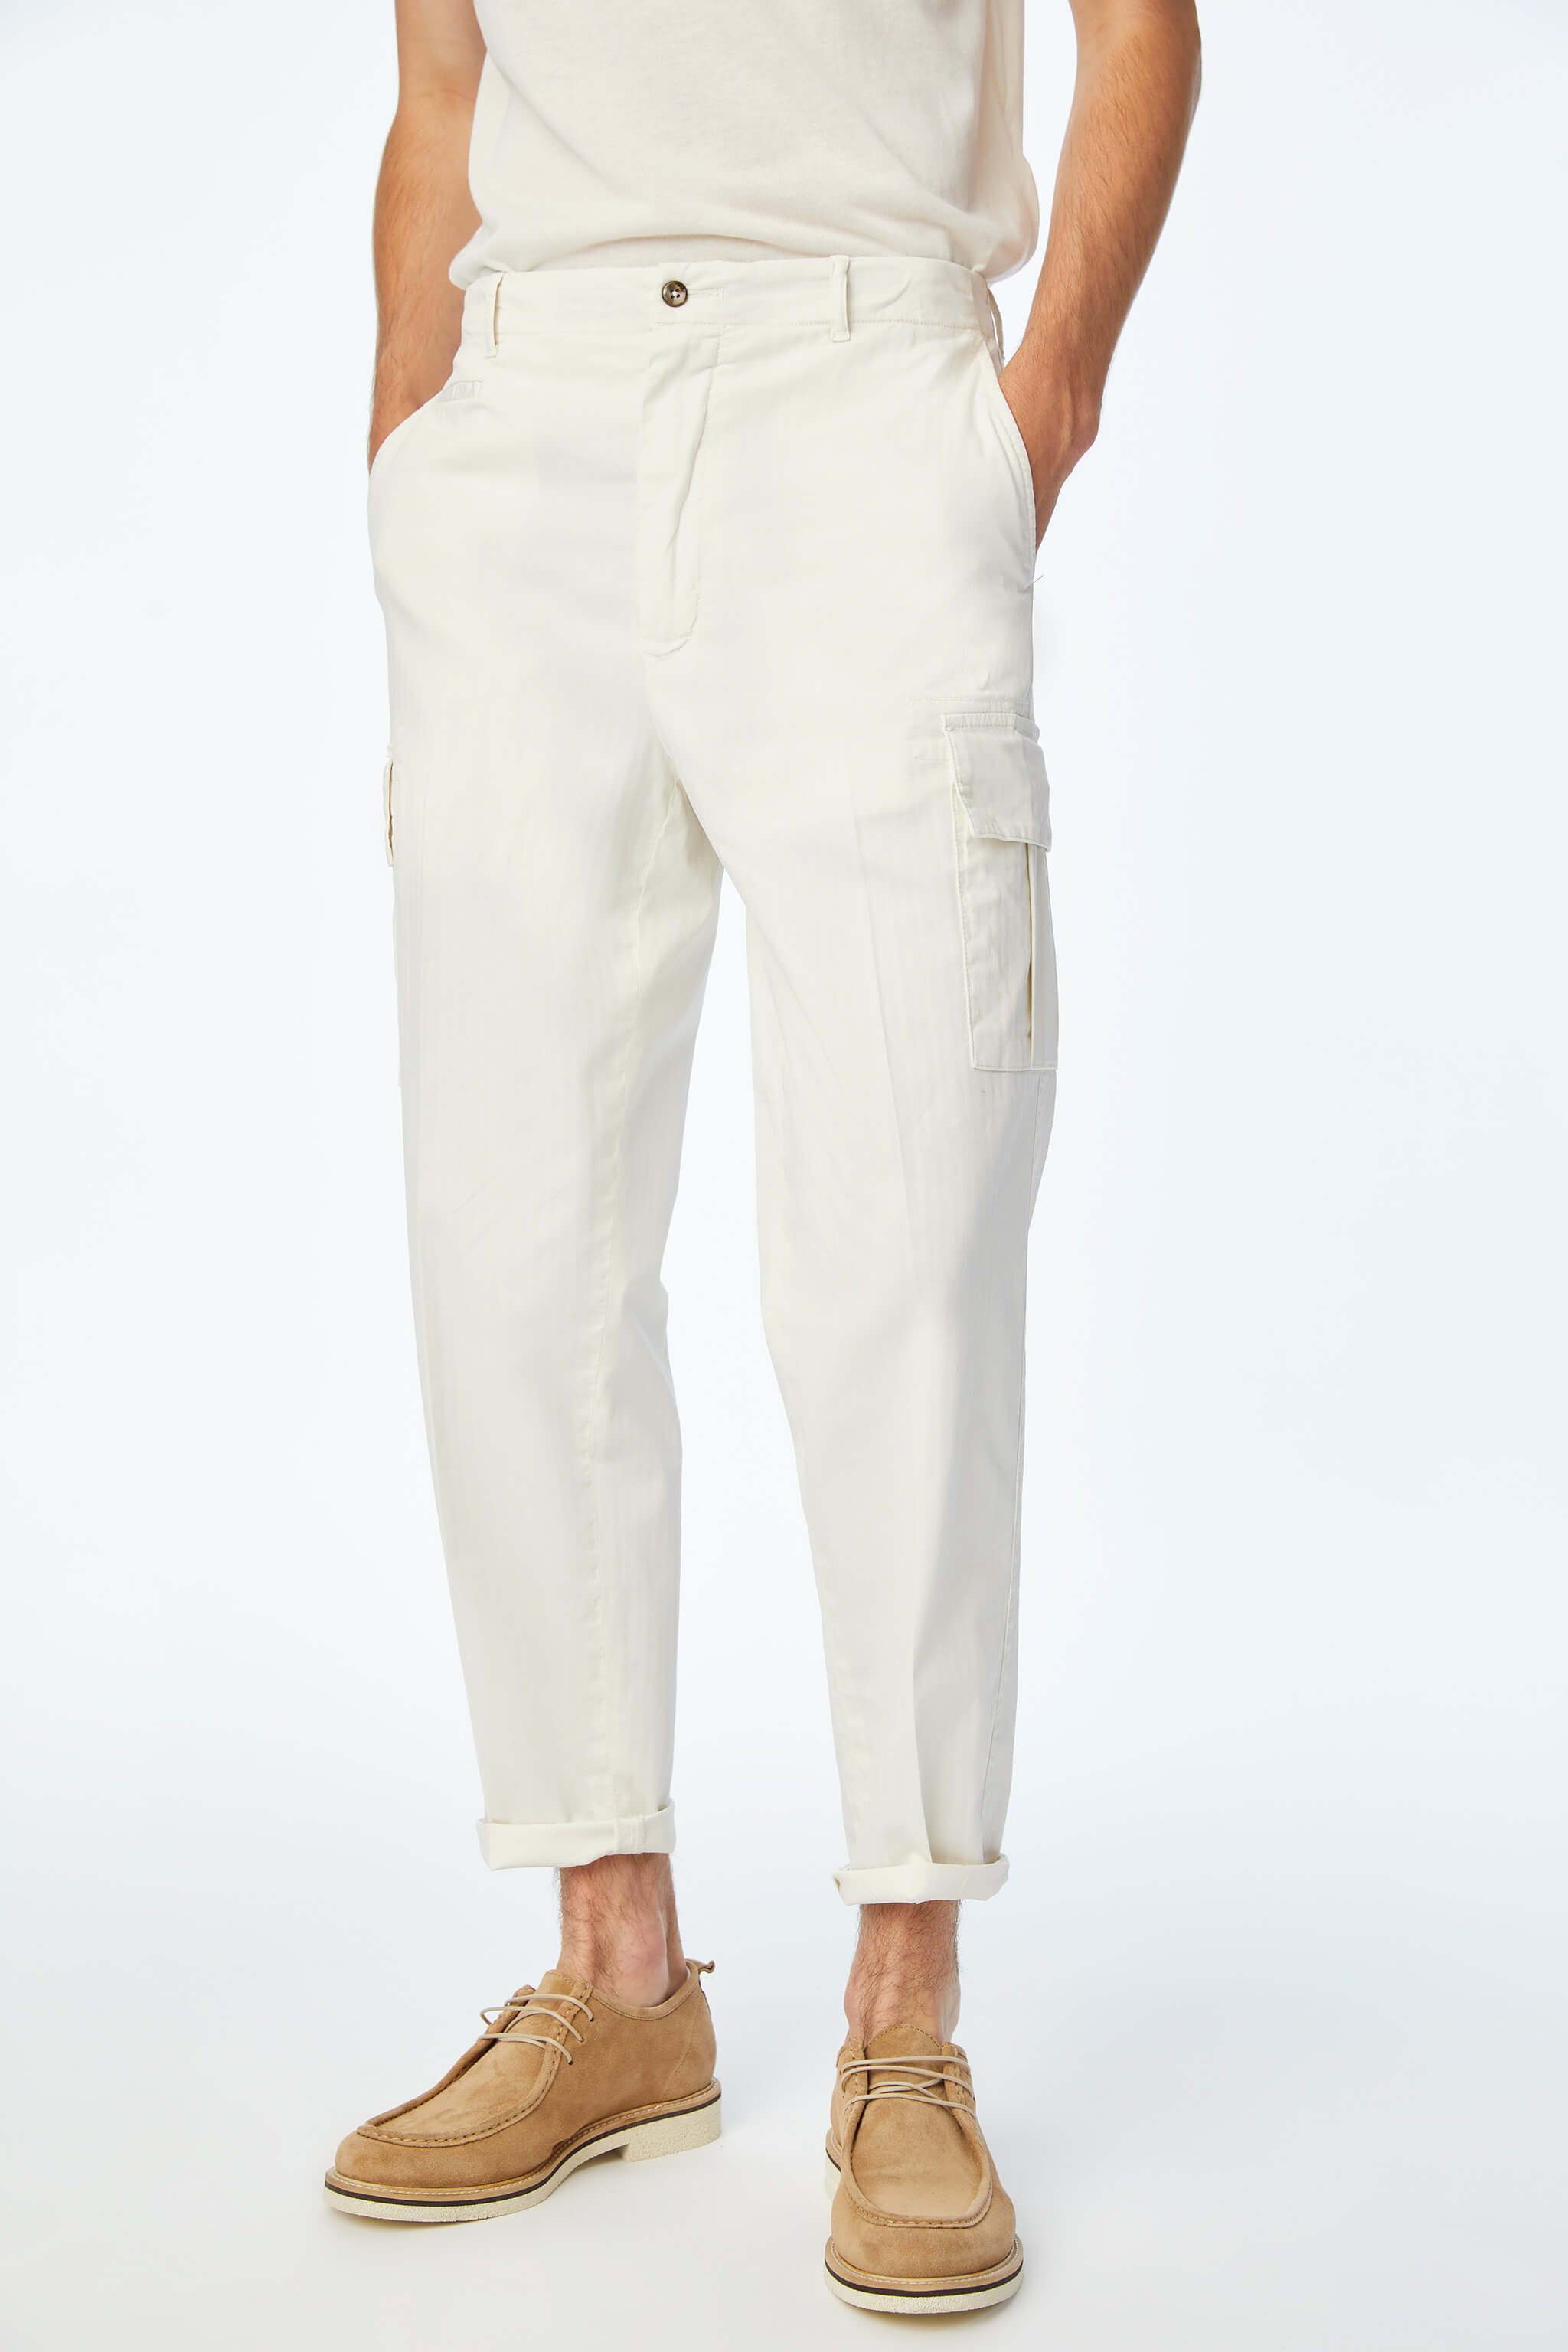 CARGO pants in White